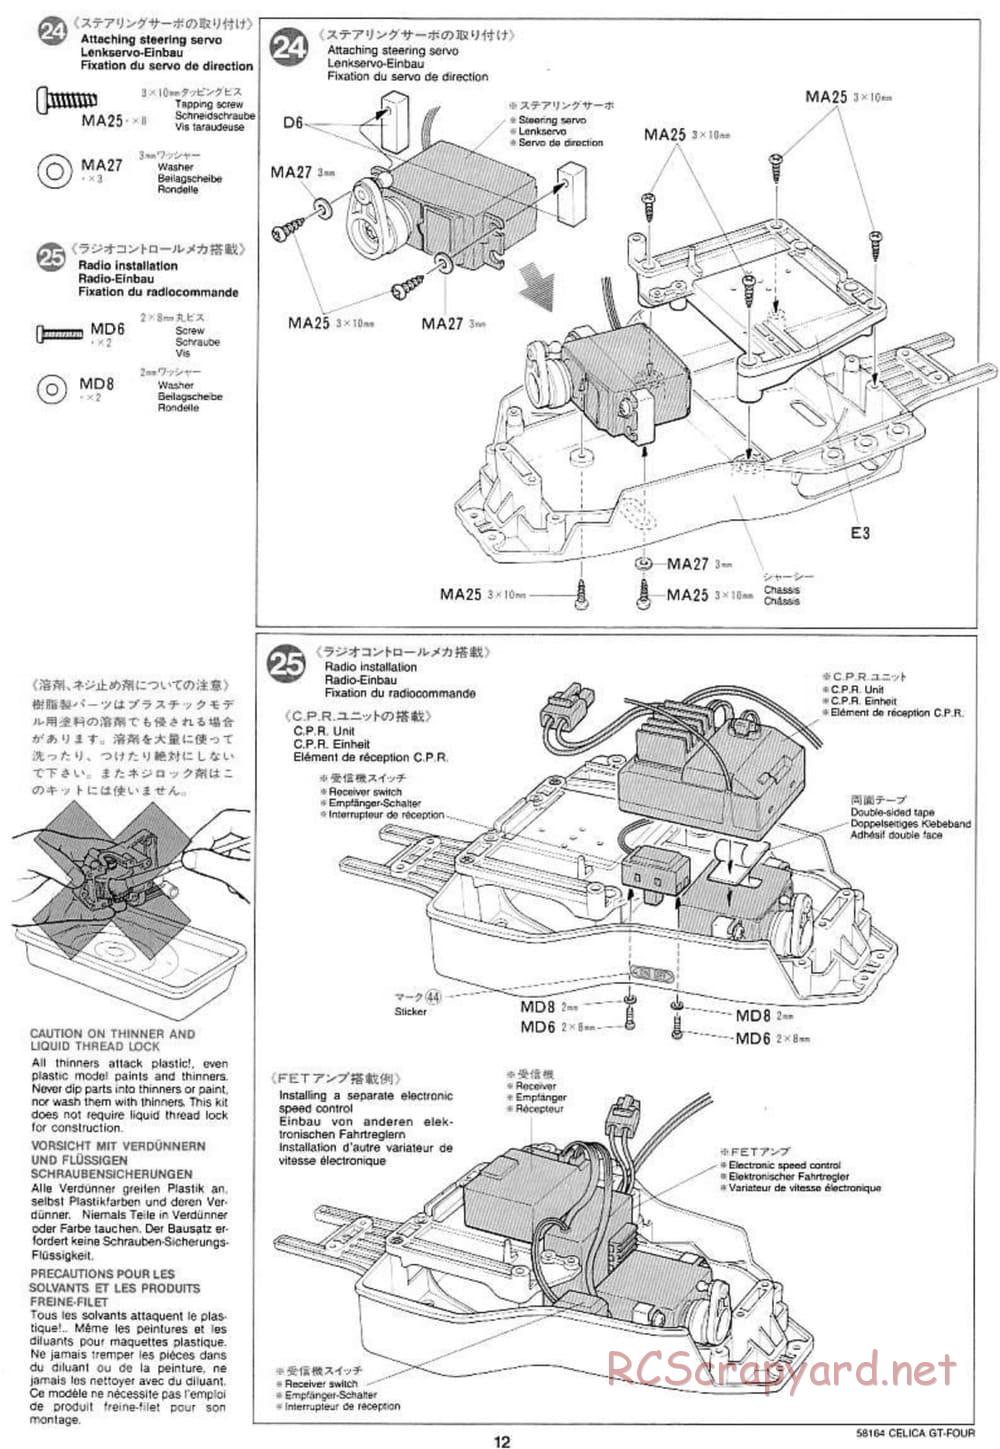 Tamiya - Toyota Celica GT Four - TA-02 Chassis - Manual - Page 12